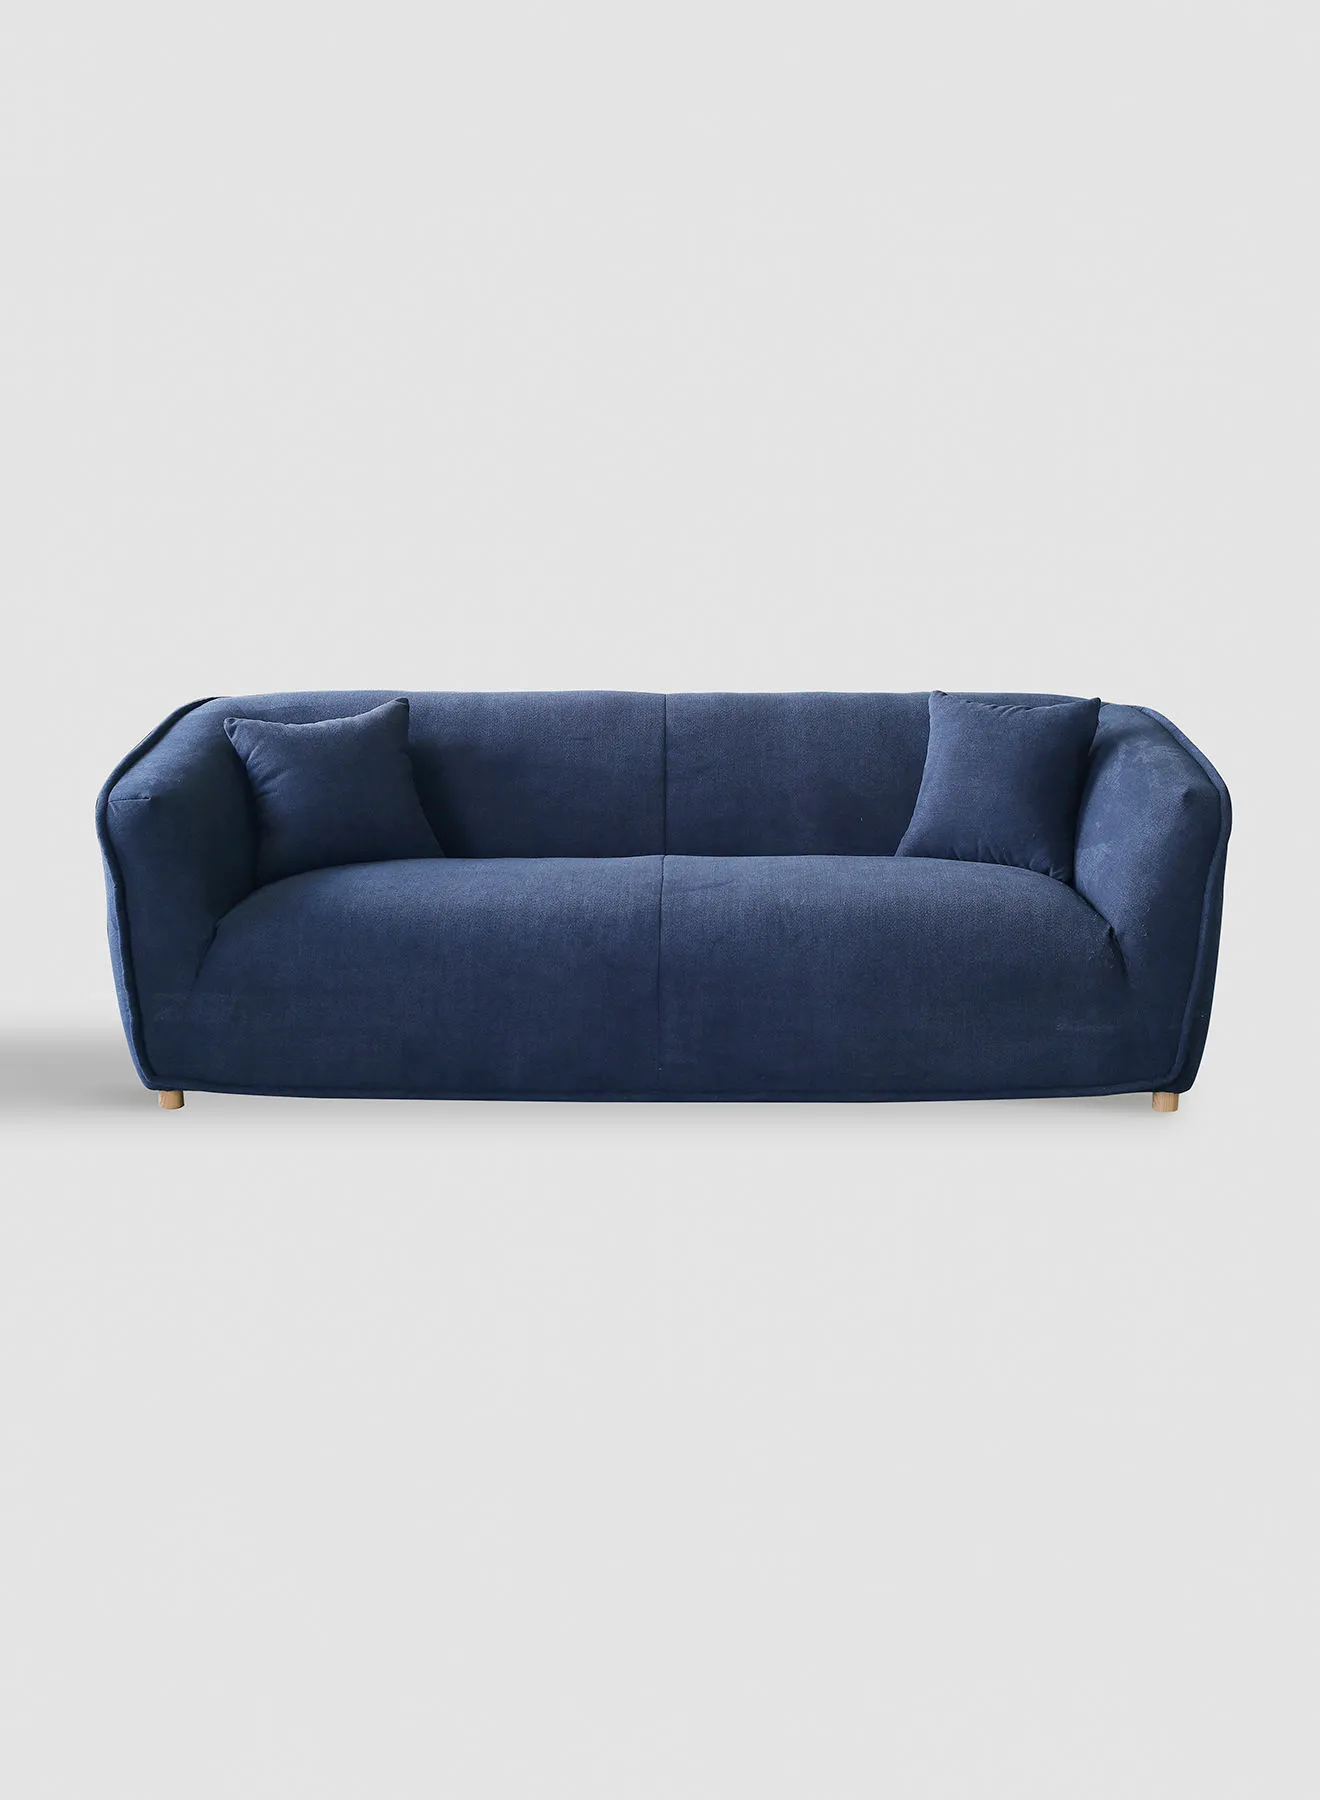 Switch Sofa - Upholstered Fabric Navy Blue Wood Couch - 2150 X 860 X 740 - 3 Seater Sofa Relaxing Sofa